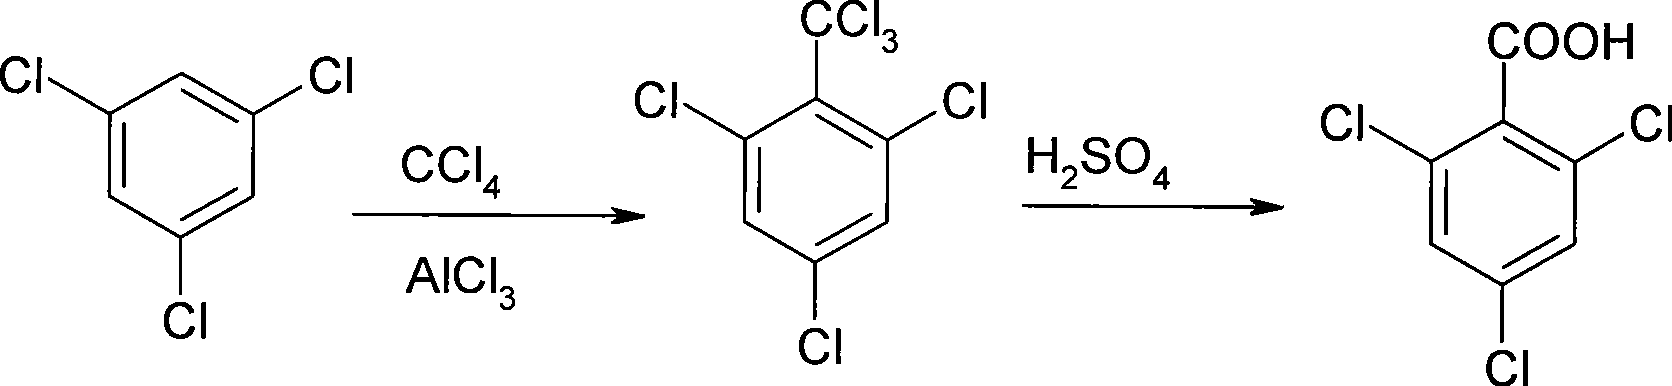 Process for producing 2, 4, 6-trichlorobenzoic acid